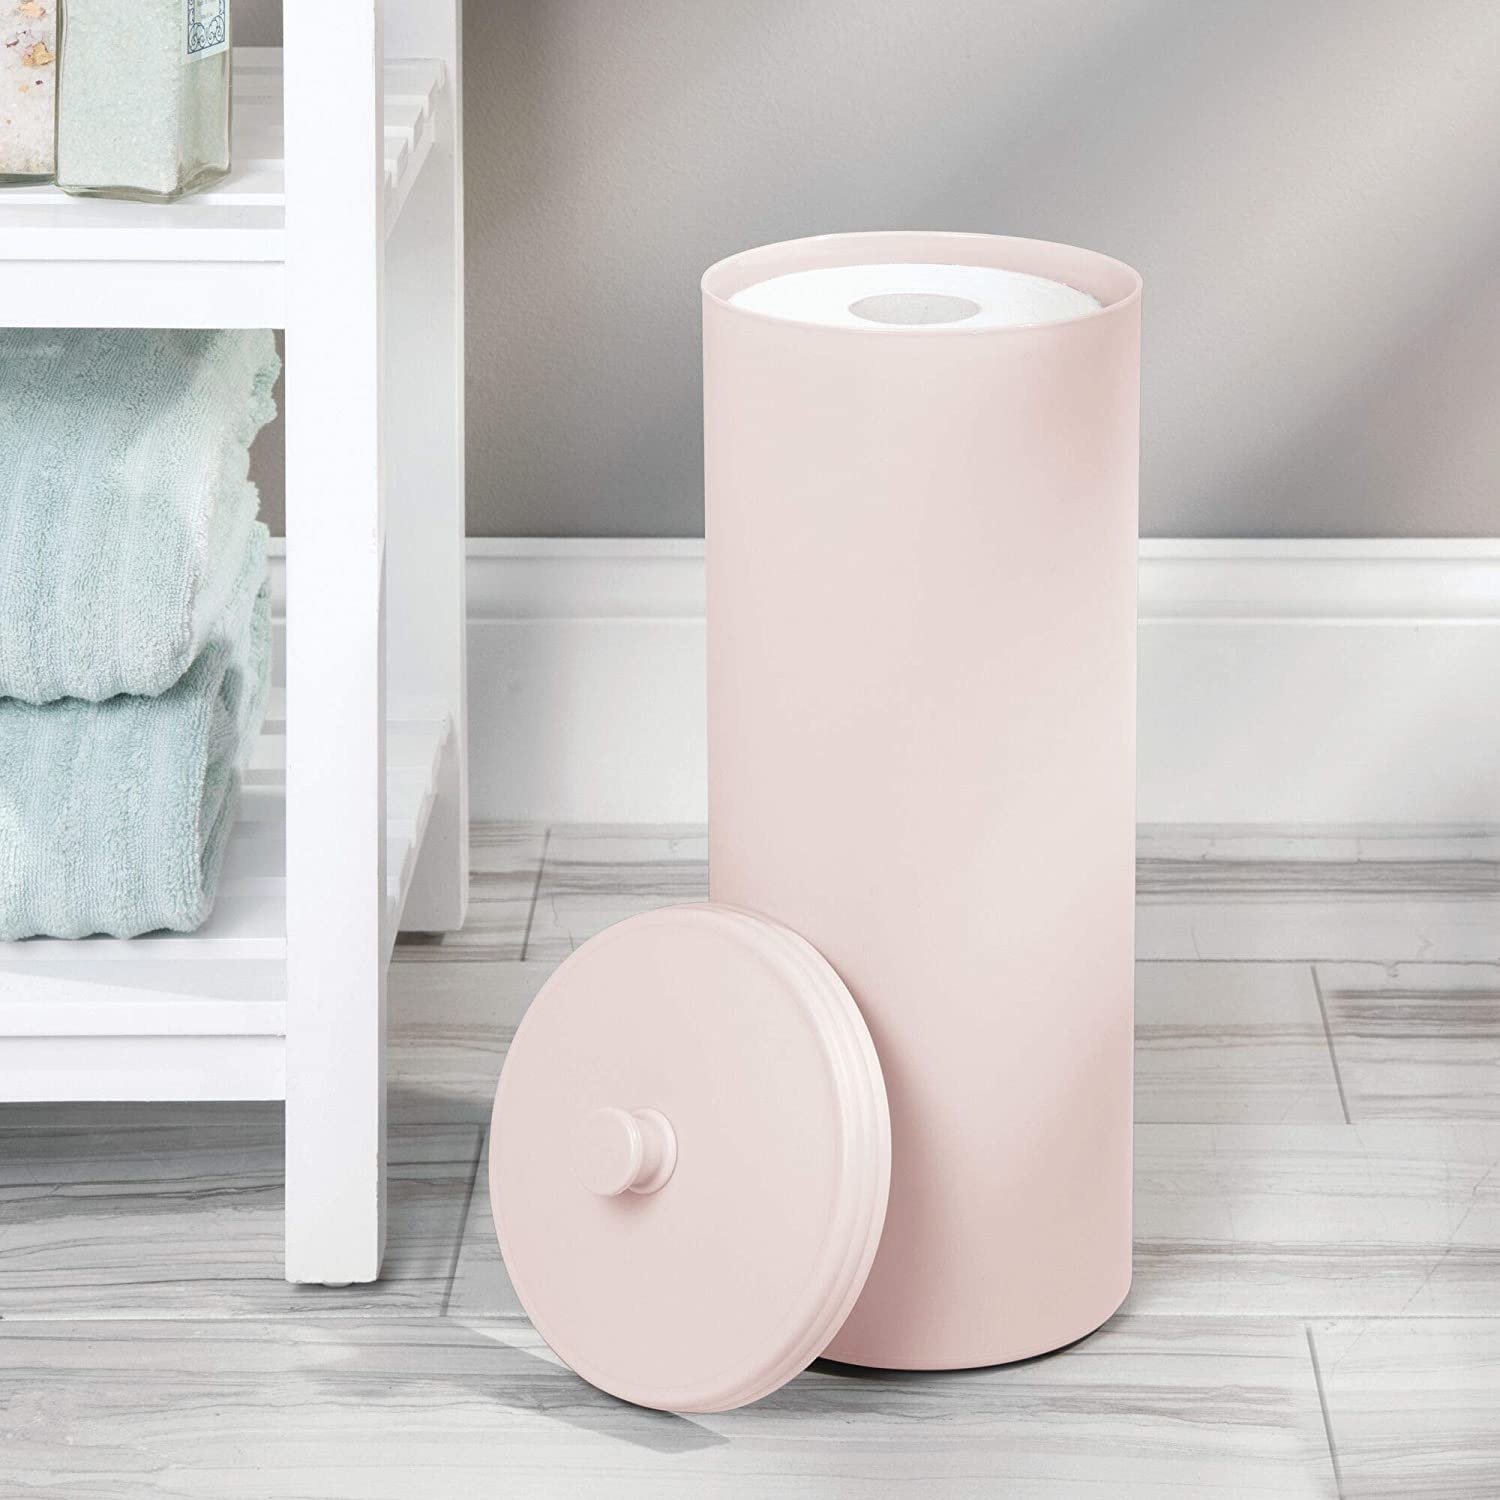 The canister in pink filled with toilet paper